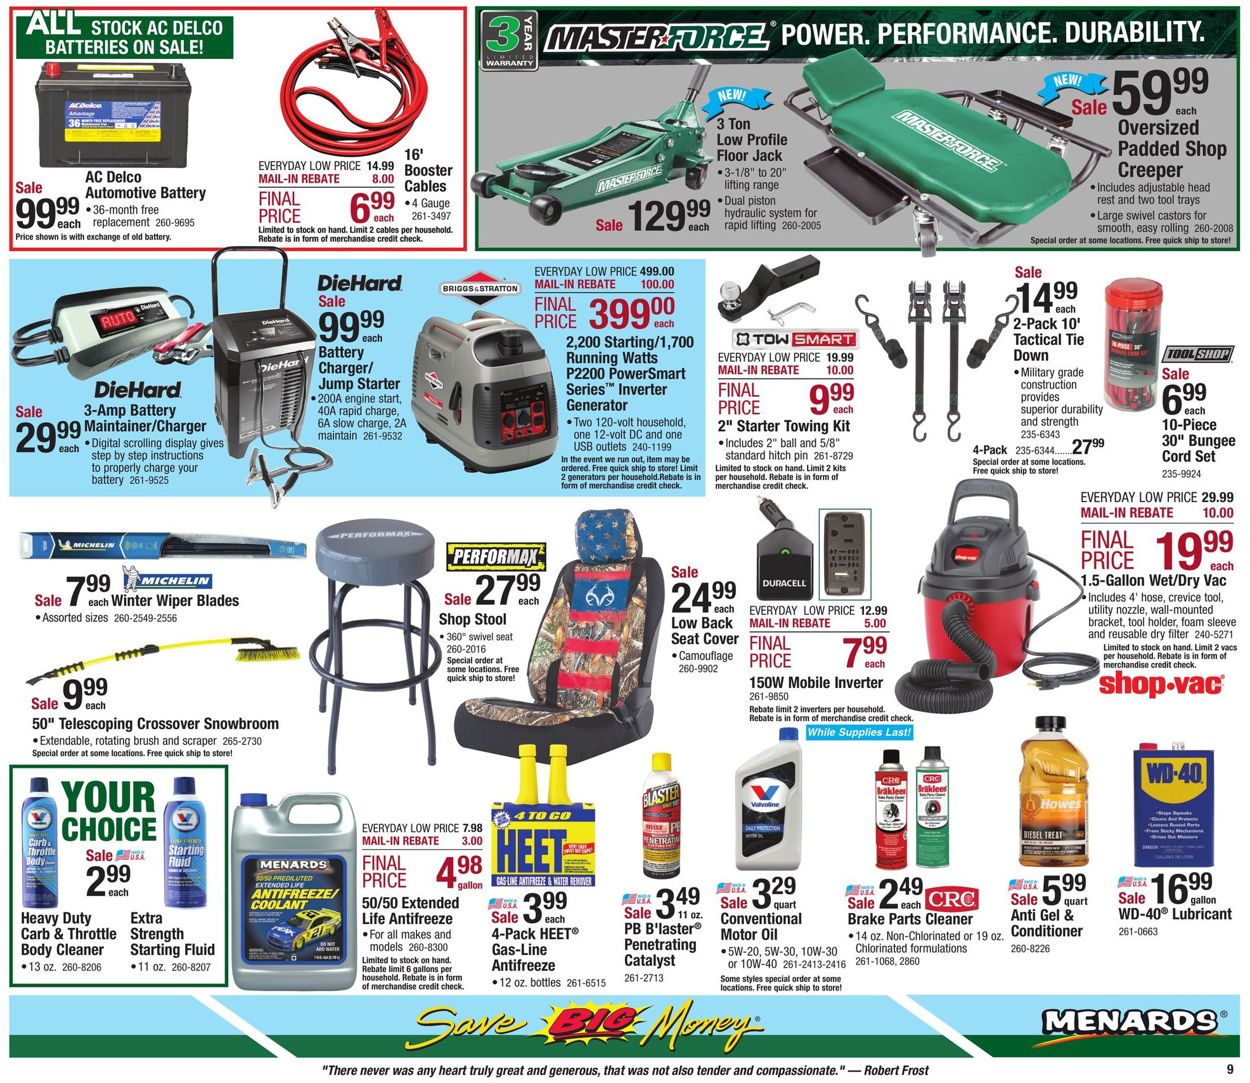 Menards - Christmas Sale Ad 2019 Current weekly ad 12/15 - 12/24/2019 [11] - www.bagssaleusa.com/product-category/scarves/